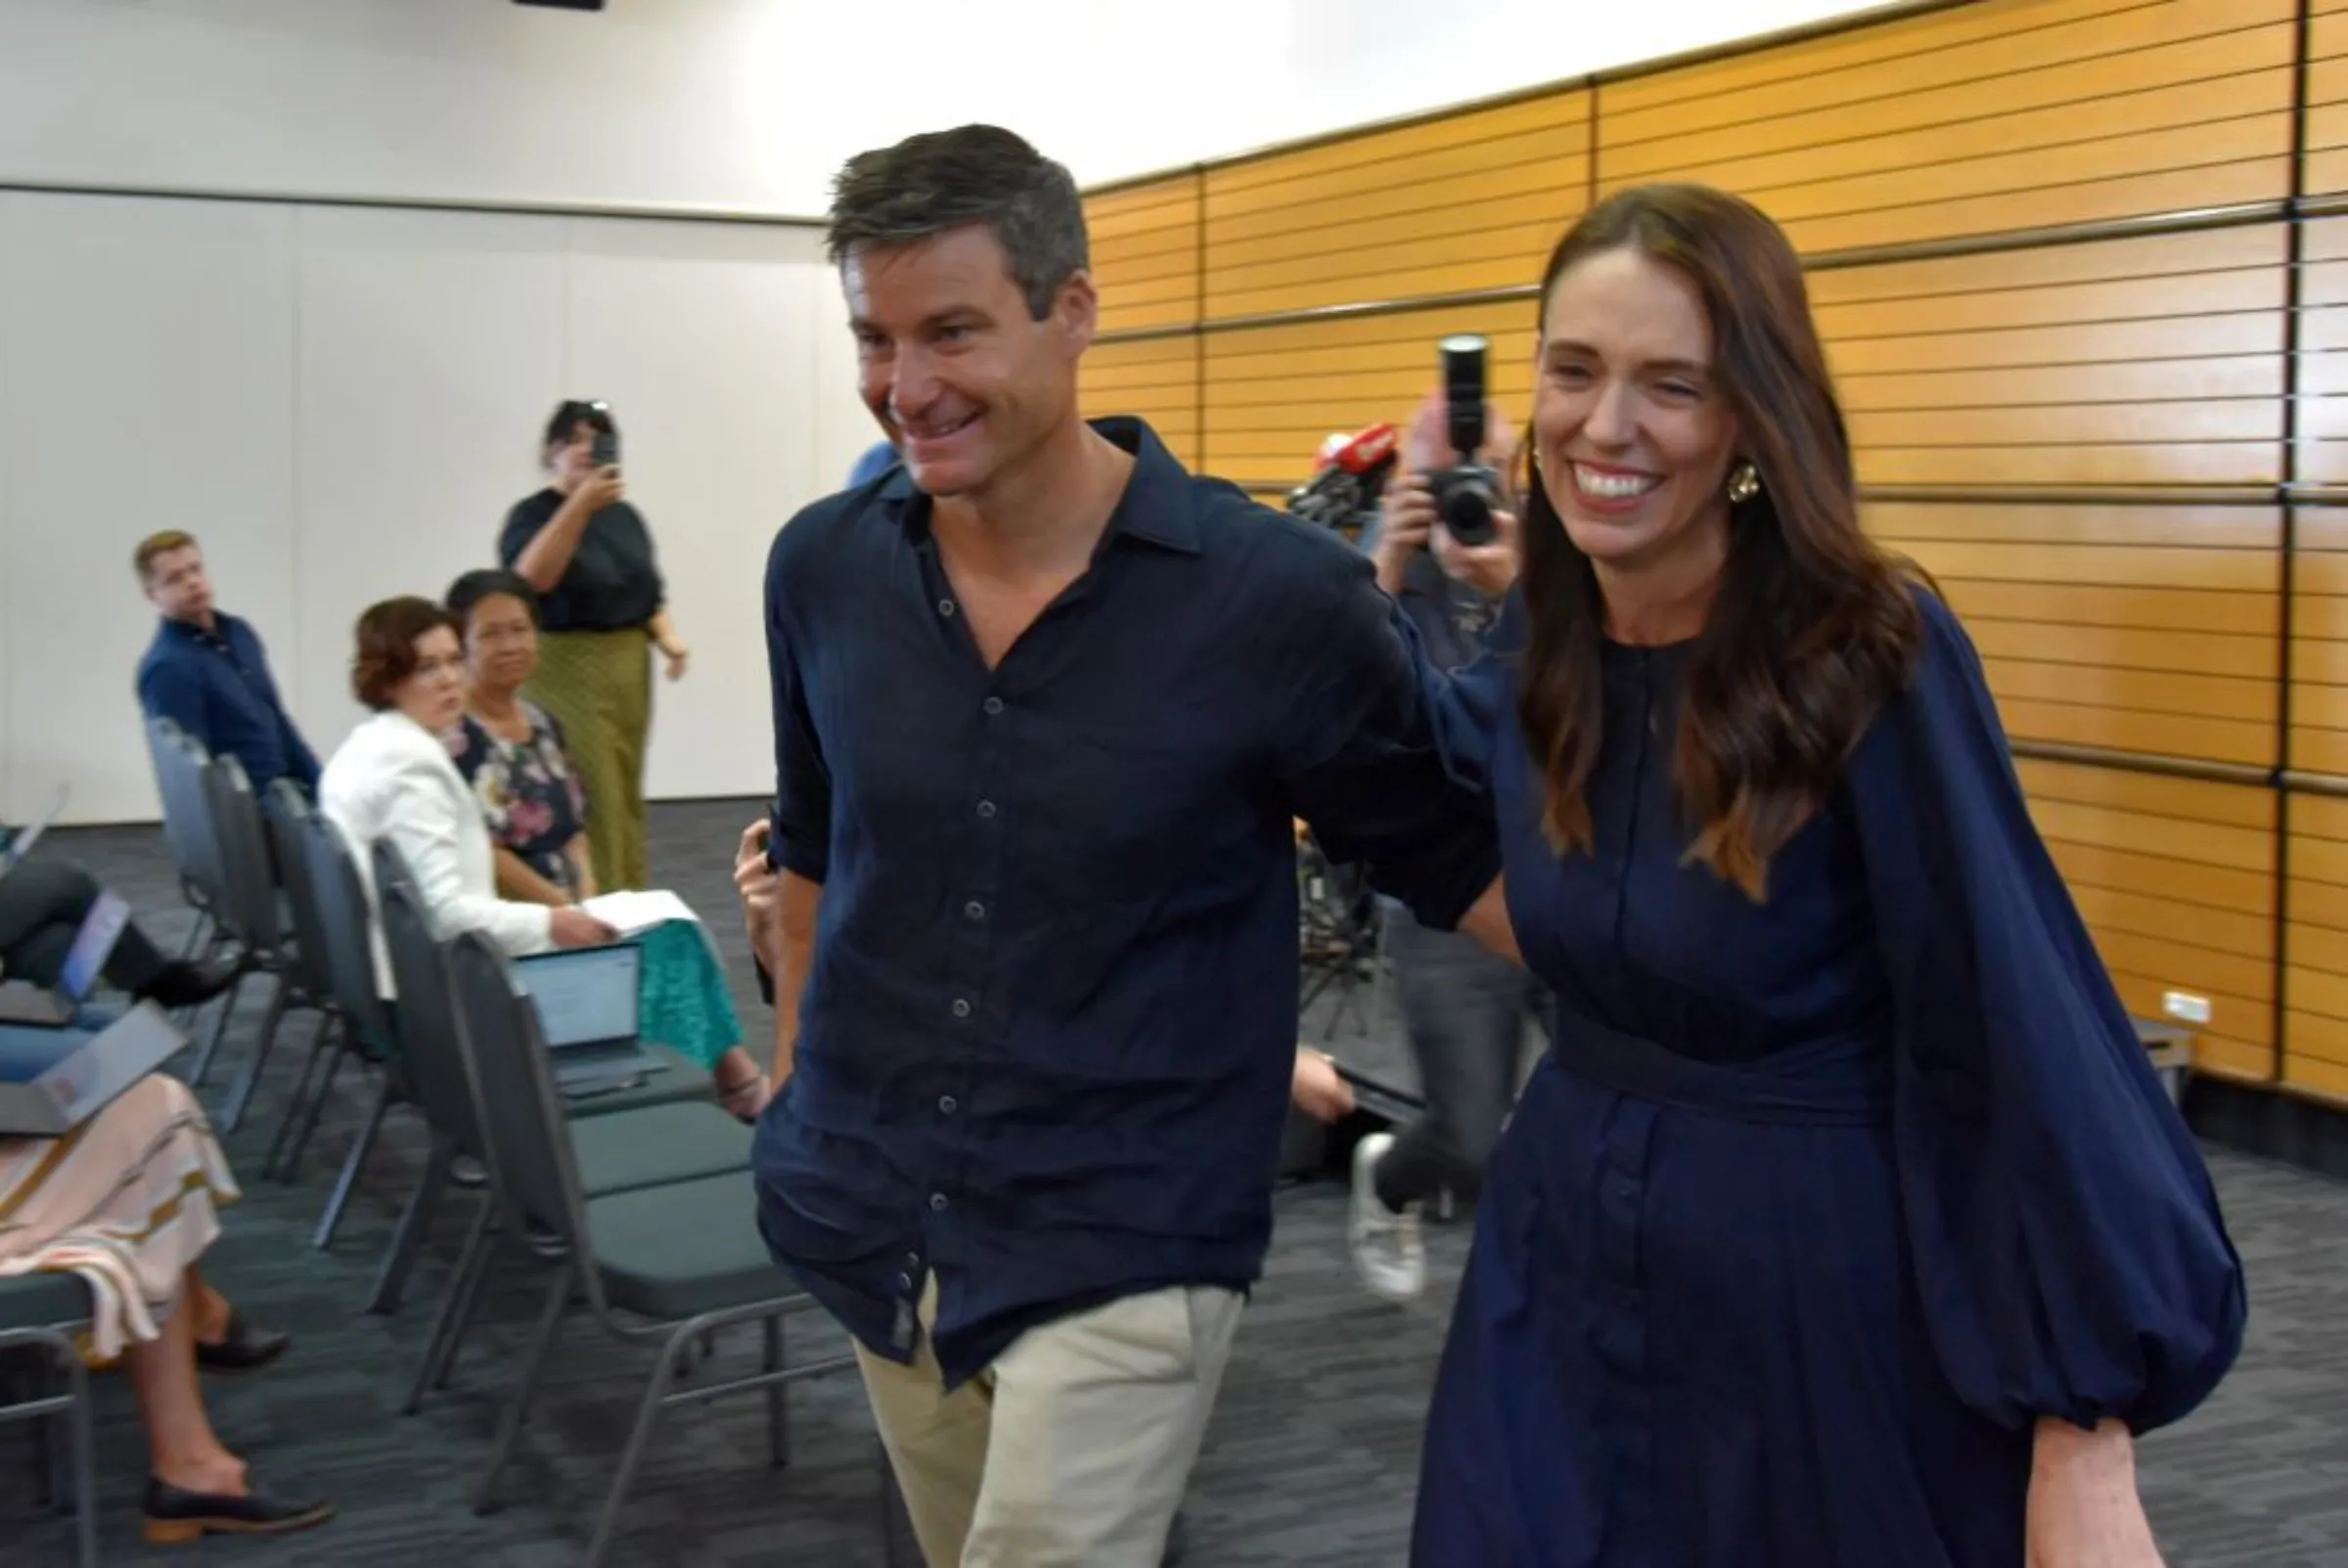 New Zealand Prime Minister Jacinda Ardern leaves with longtime partner Clarke Gayford following the announcement of her resignation at the War Memorial Hall, in Napier, New Zealand January 19, 2023. AAP Image/Ben McLay via REUTERS